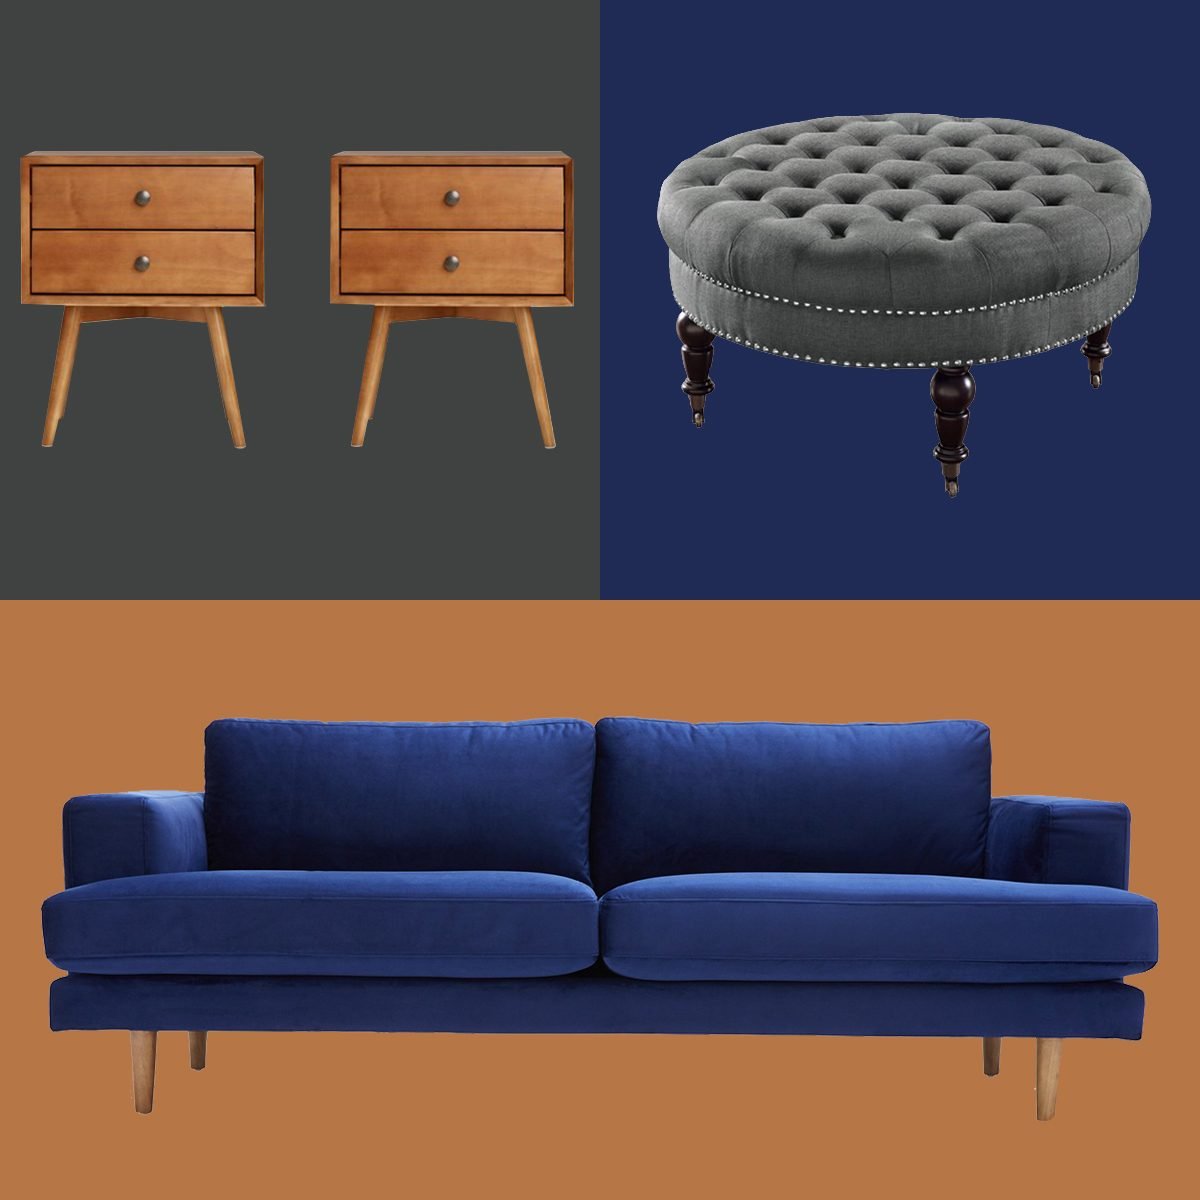 20 Pieces of Walmart Furniture to Upgrade Your Home